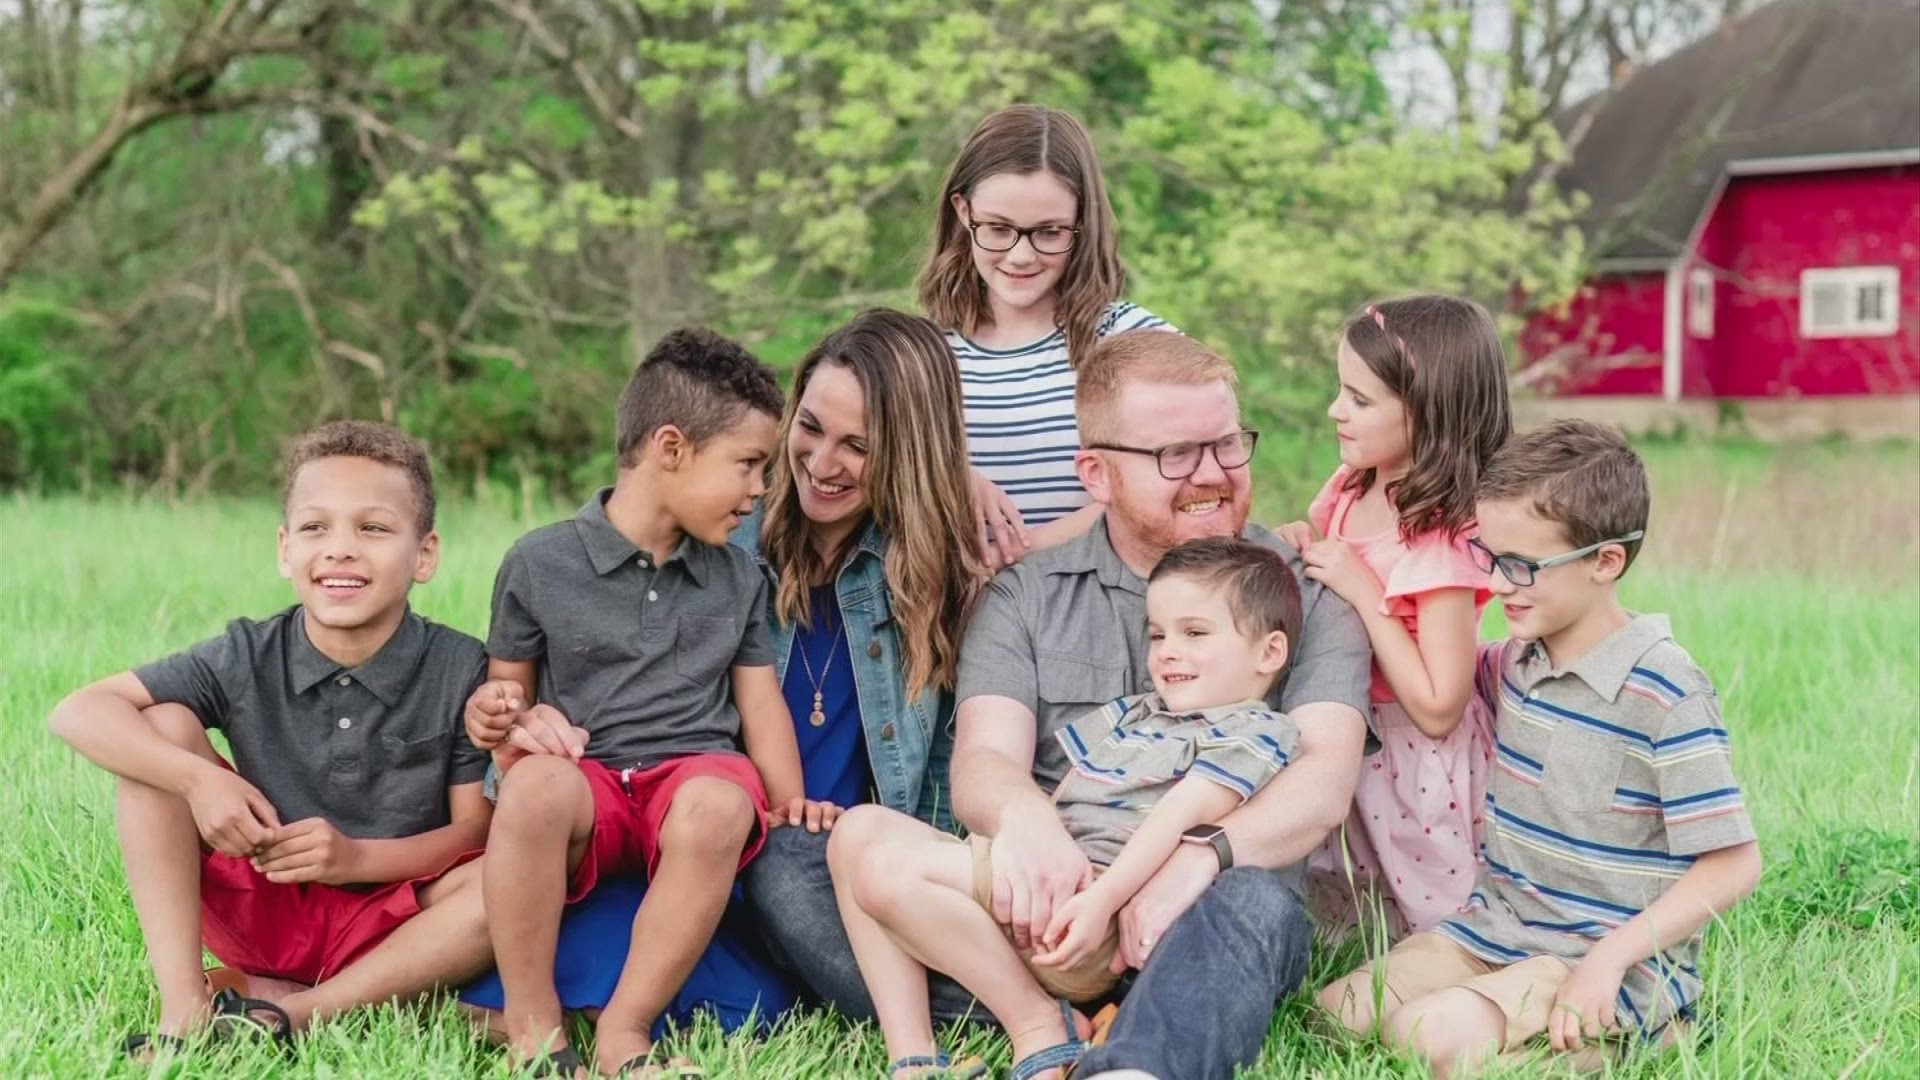 The Welsch family adopted two brothers who entered the foster care system four years ago.